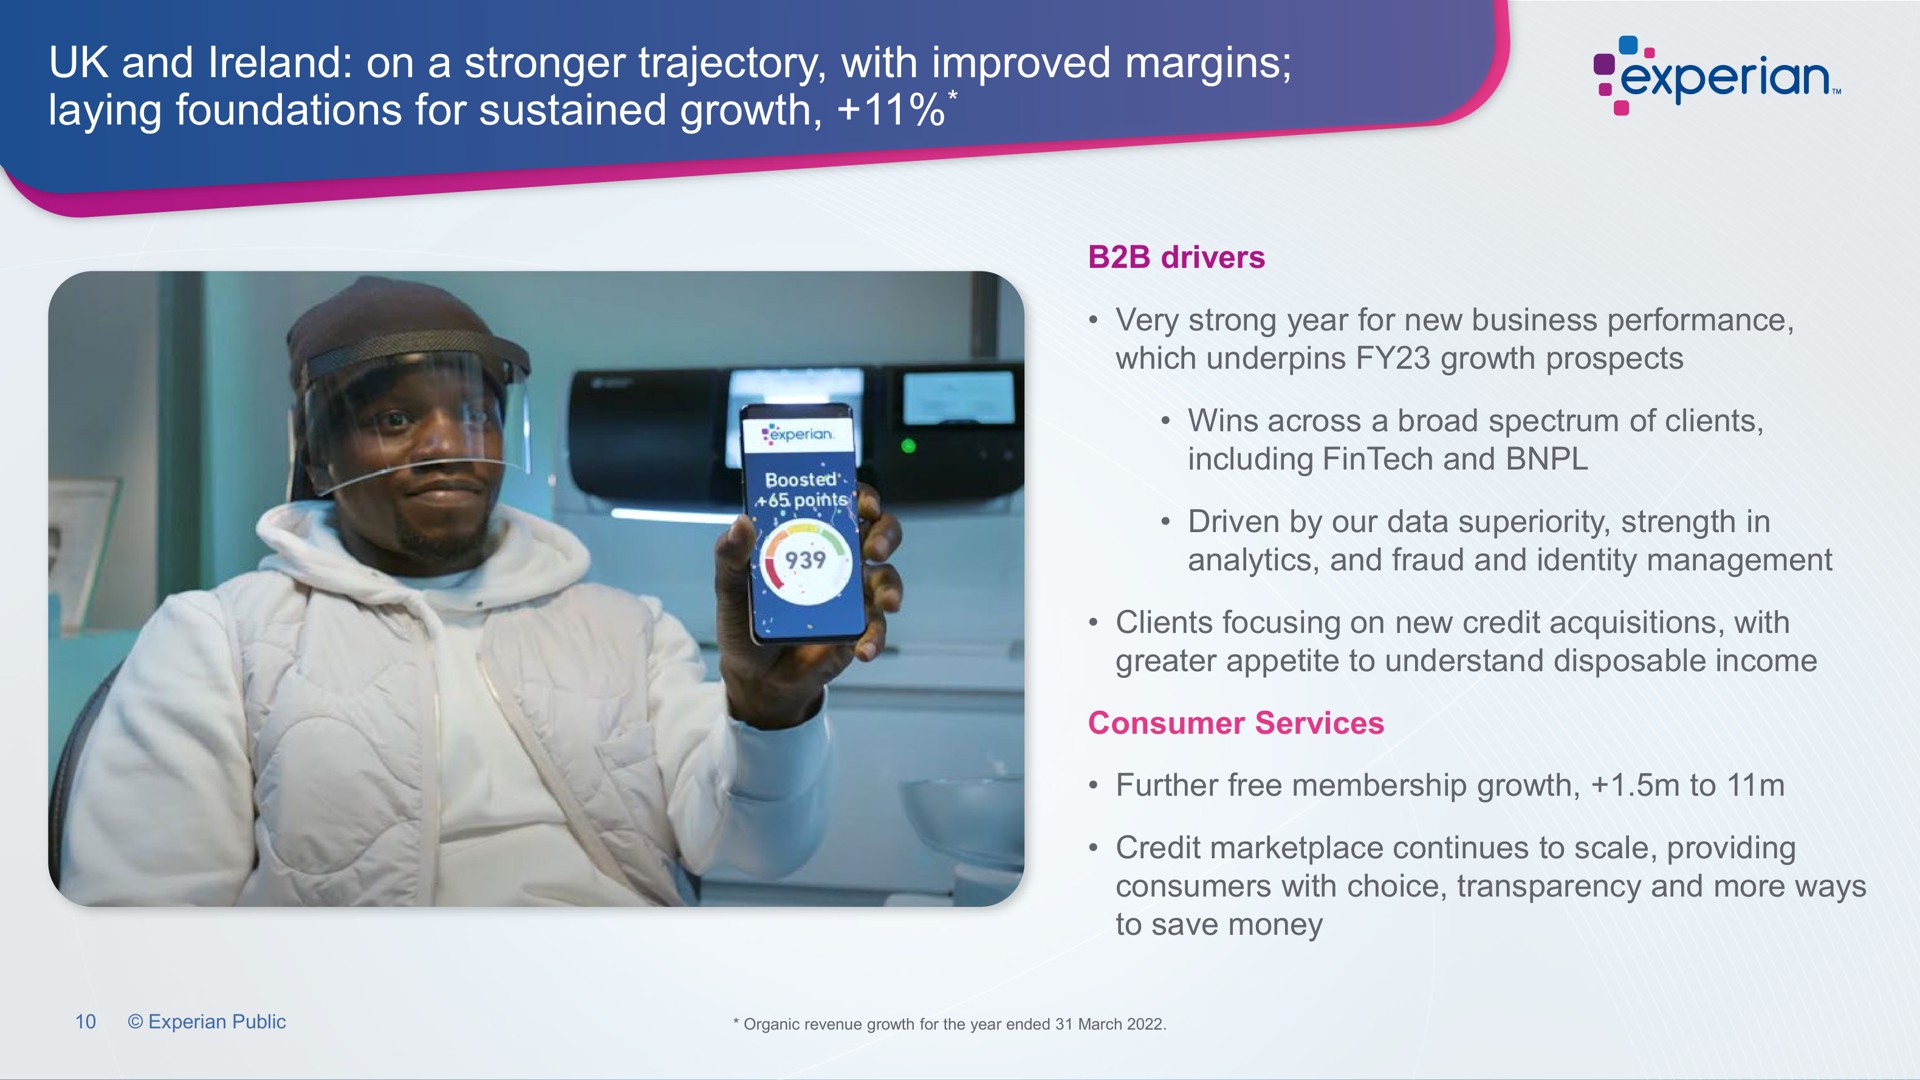 and on a trajectory with improved margins laying foundations for sustained growth | Experian